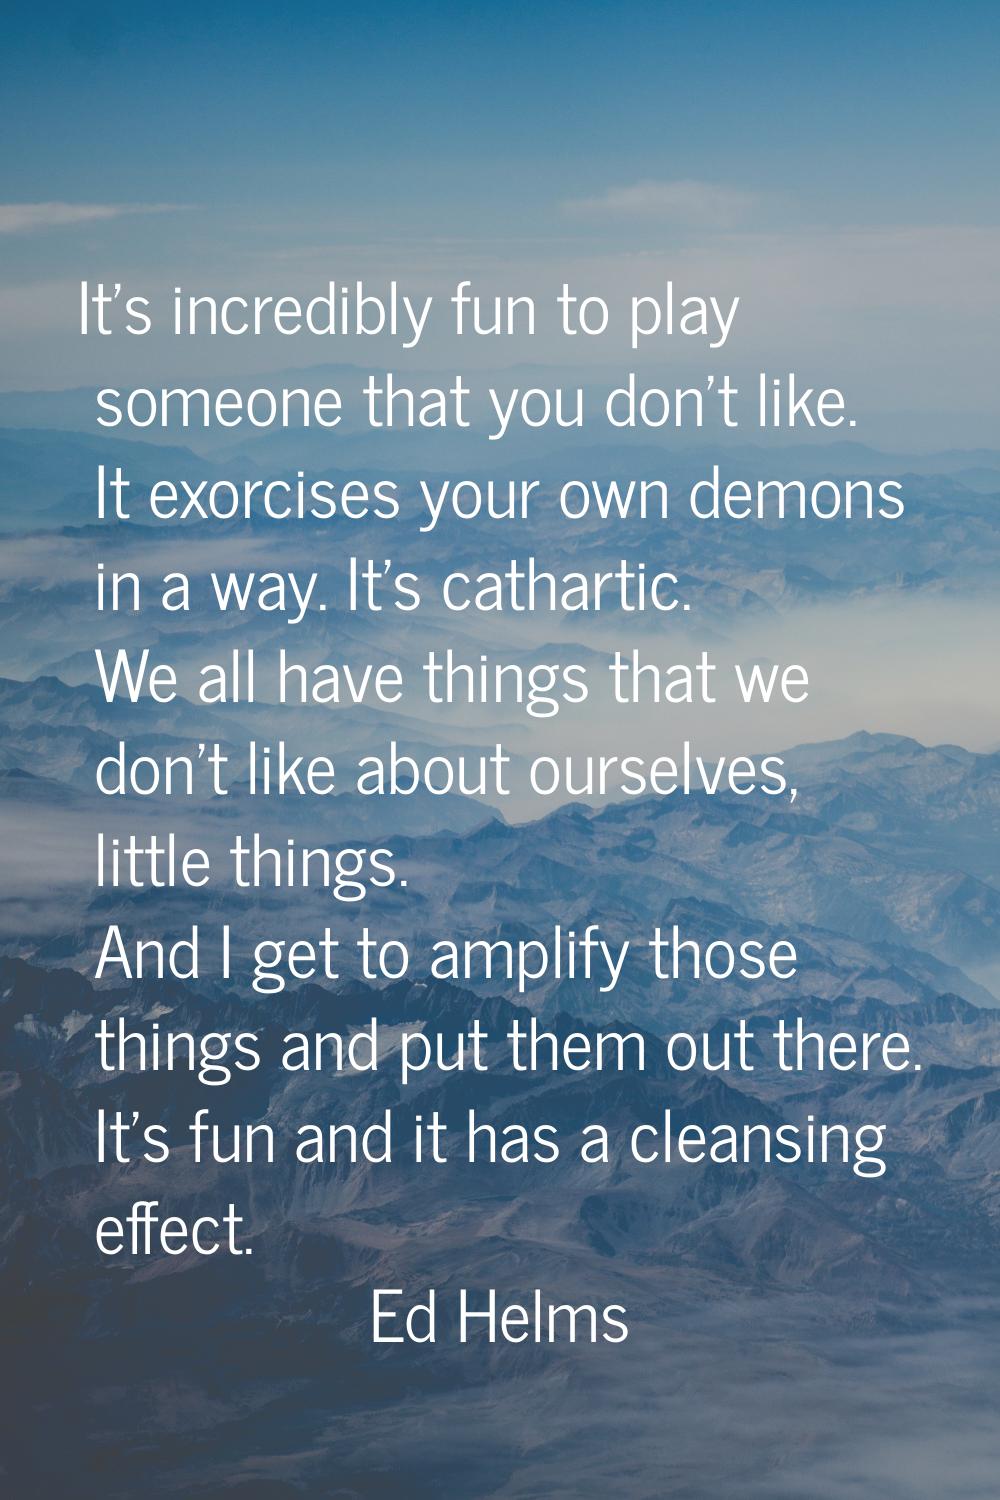 It's incredibly fun to play someone that you don't like. It exorcises your own demons in a way. It'